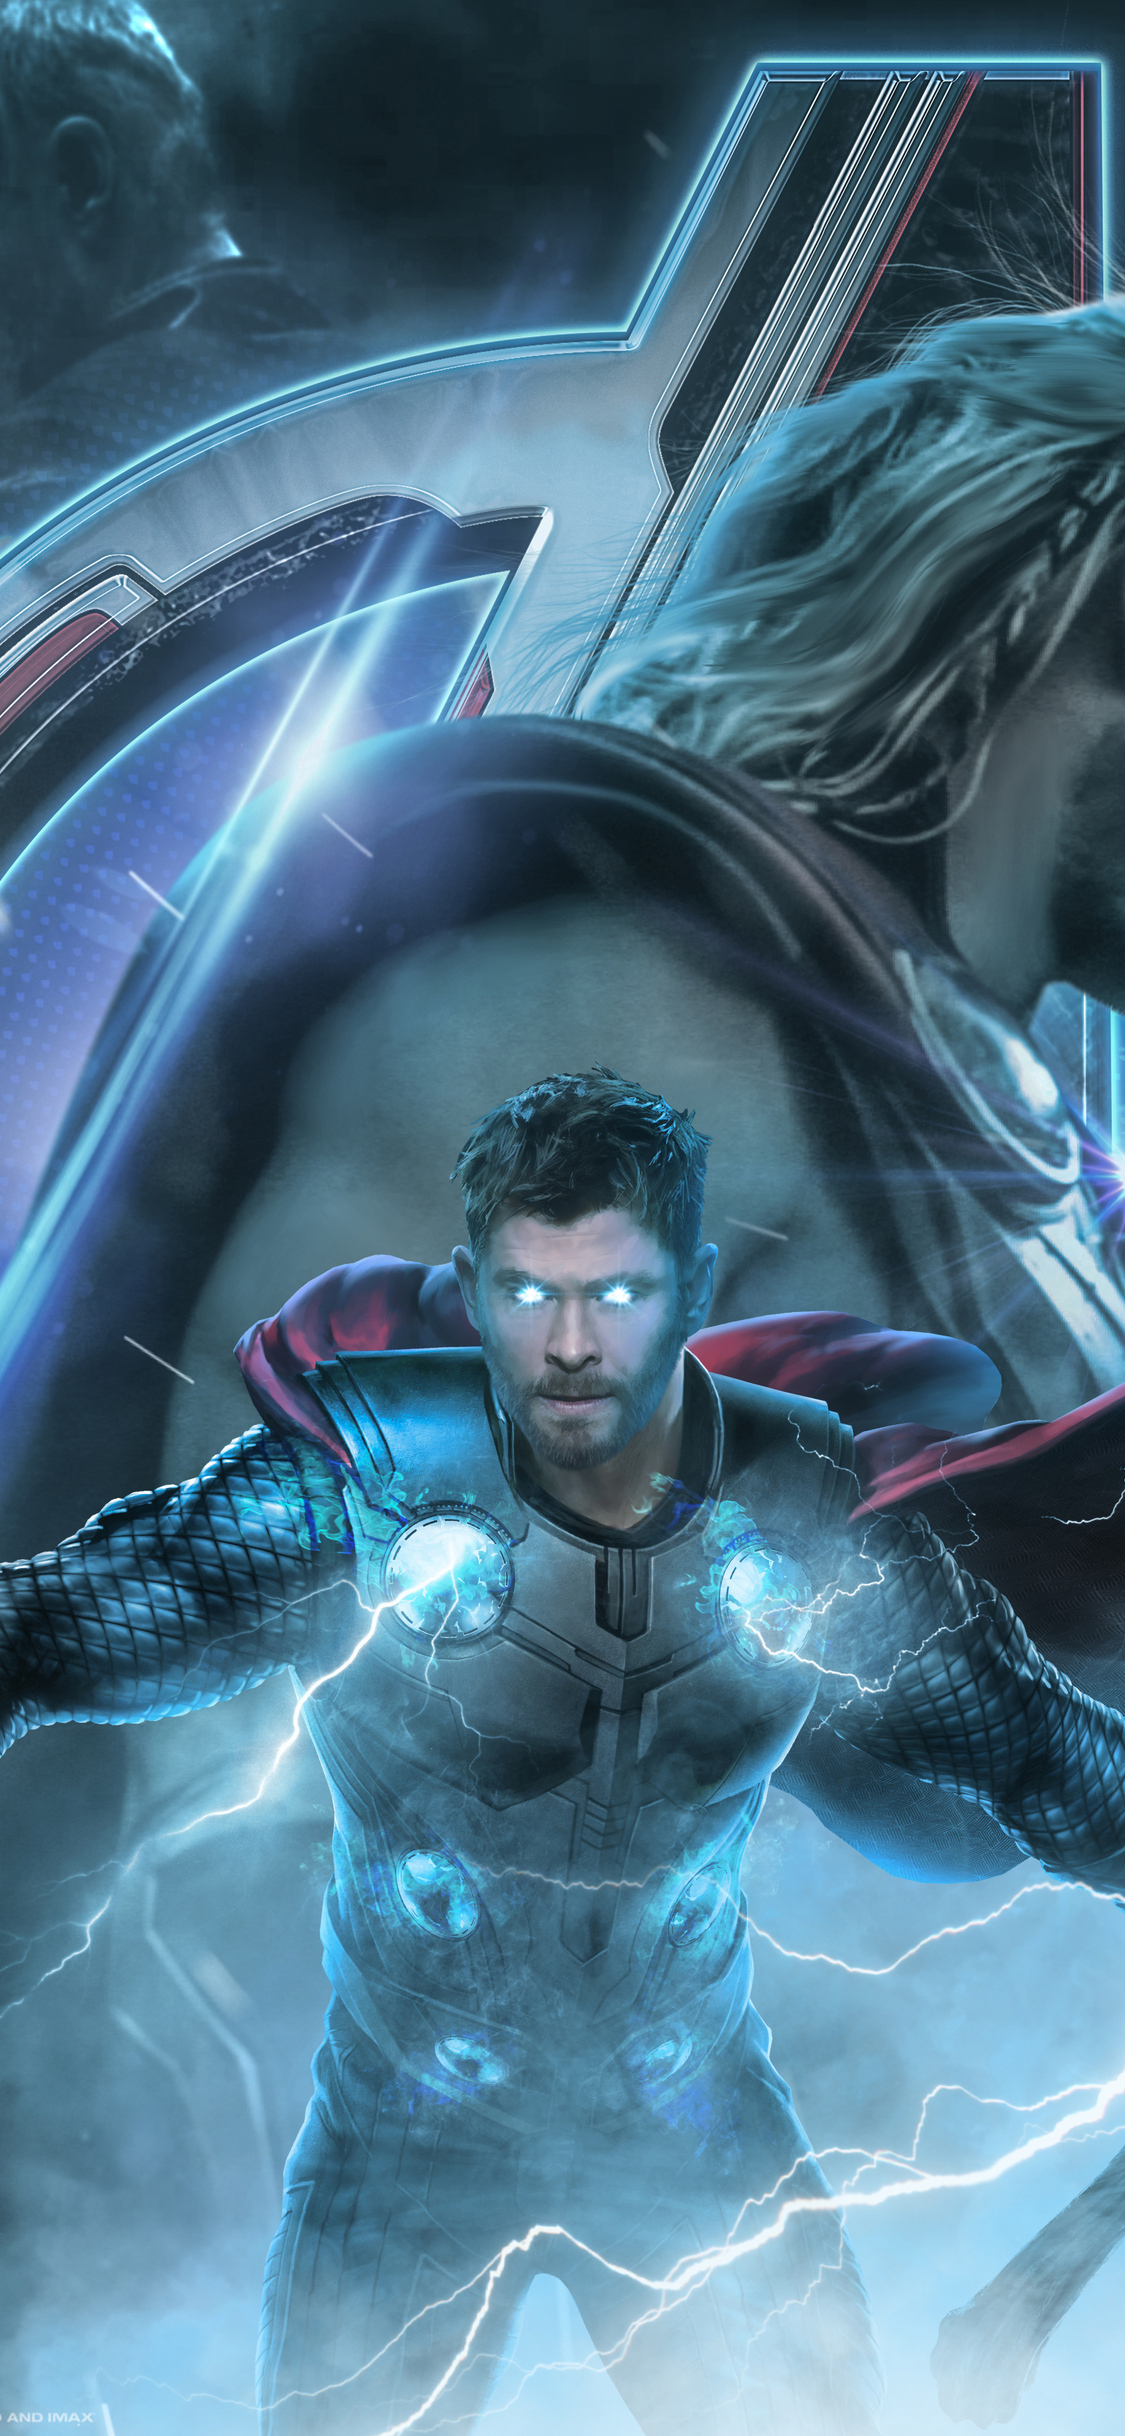 1125x2436 Thor Avengers End Game 2019 Iphone XS,Iphone 10,Iphone X HD